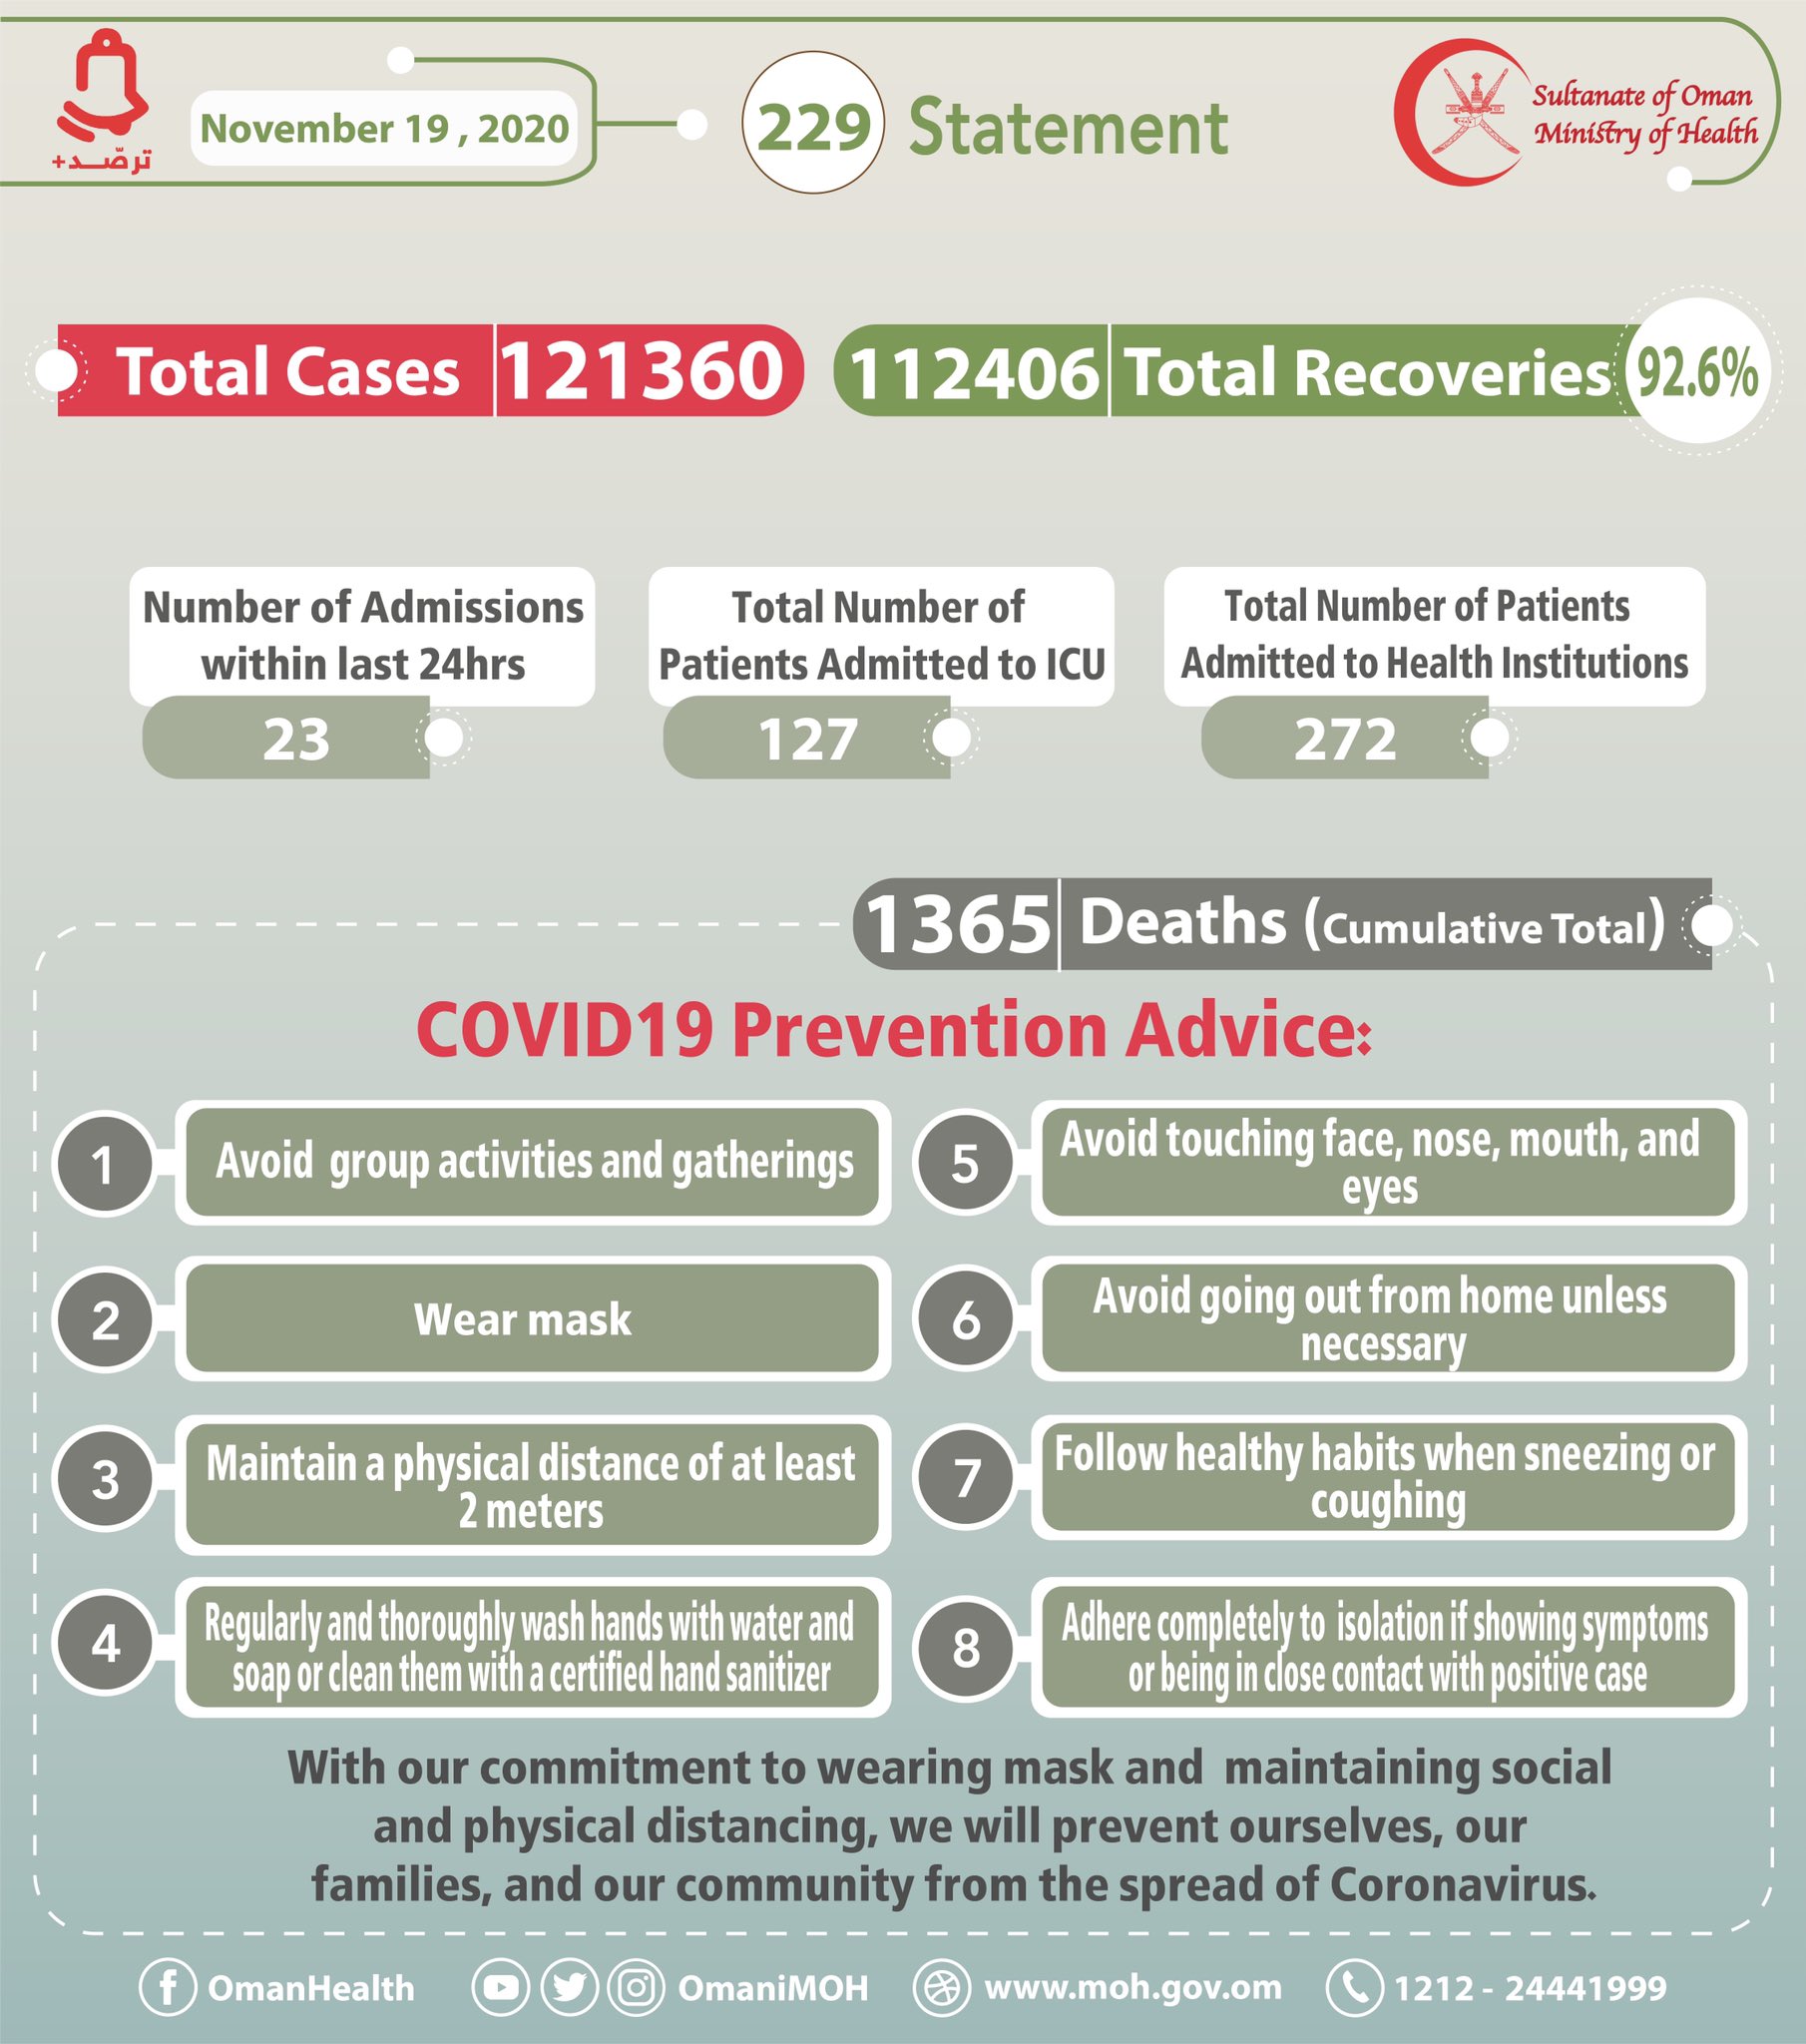 231 New Corona Cases In Oman, Total Cases Reached To 121,360